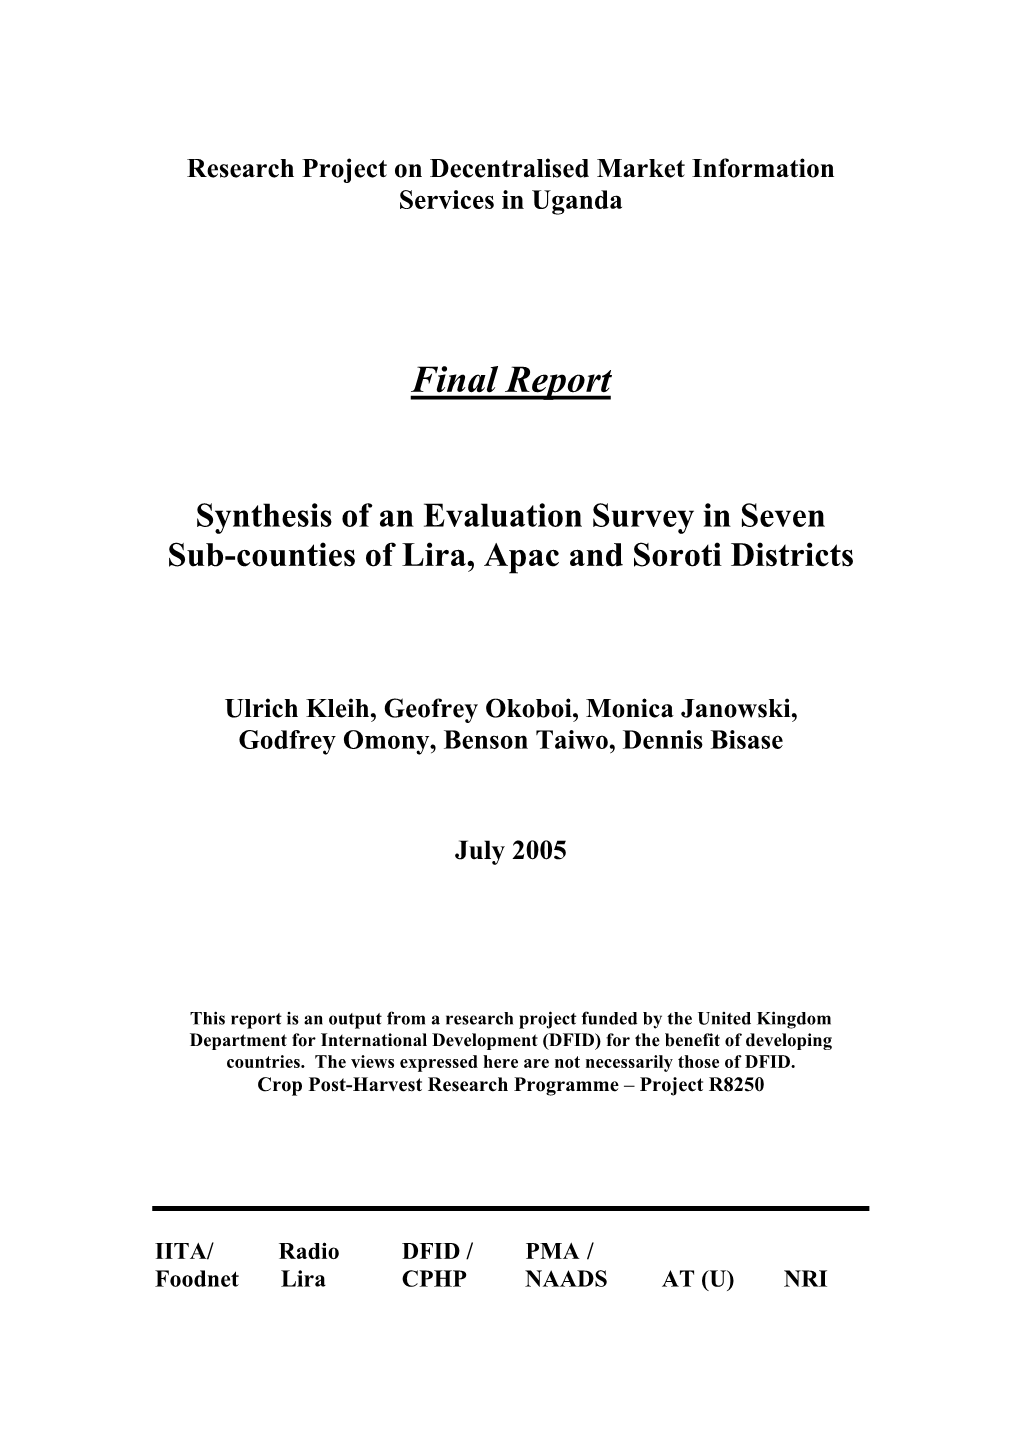 Synthesis of an Evaluation Survey in Seven Sub-Counties of Lira, Apac and Soroti Districts